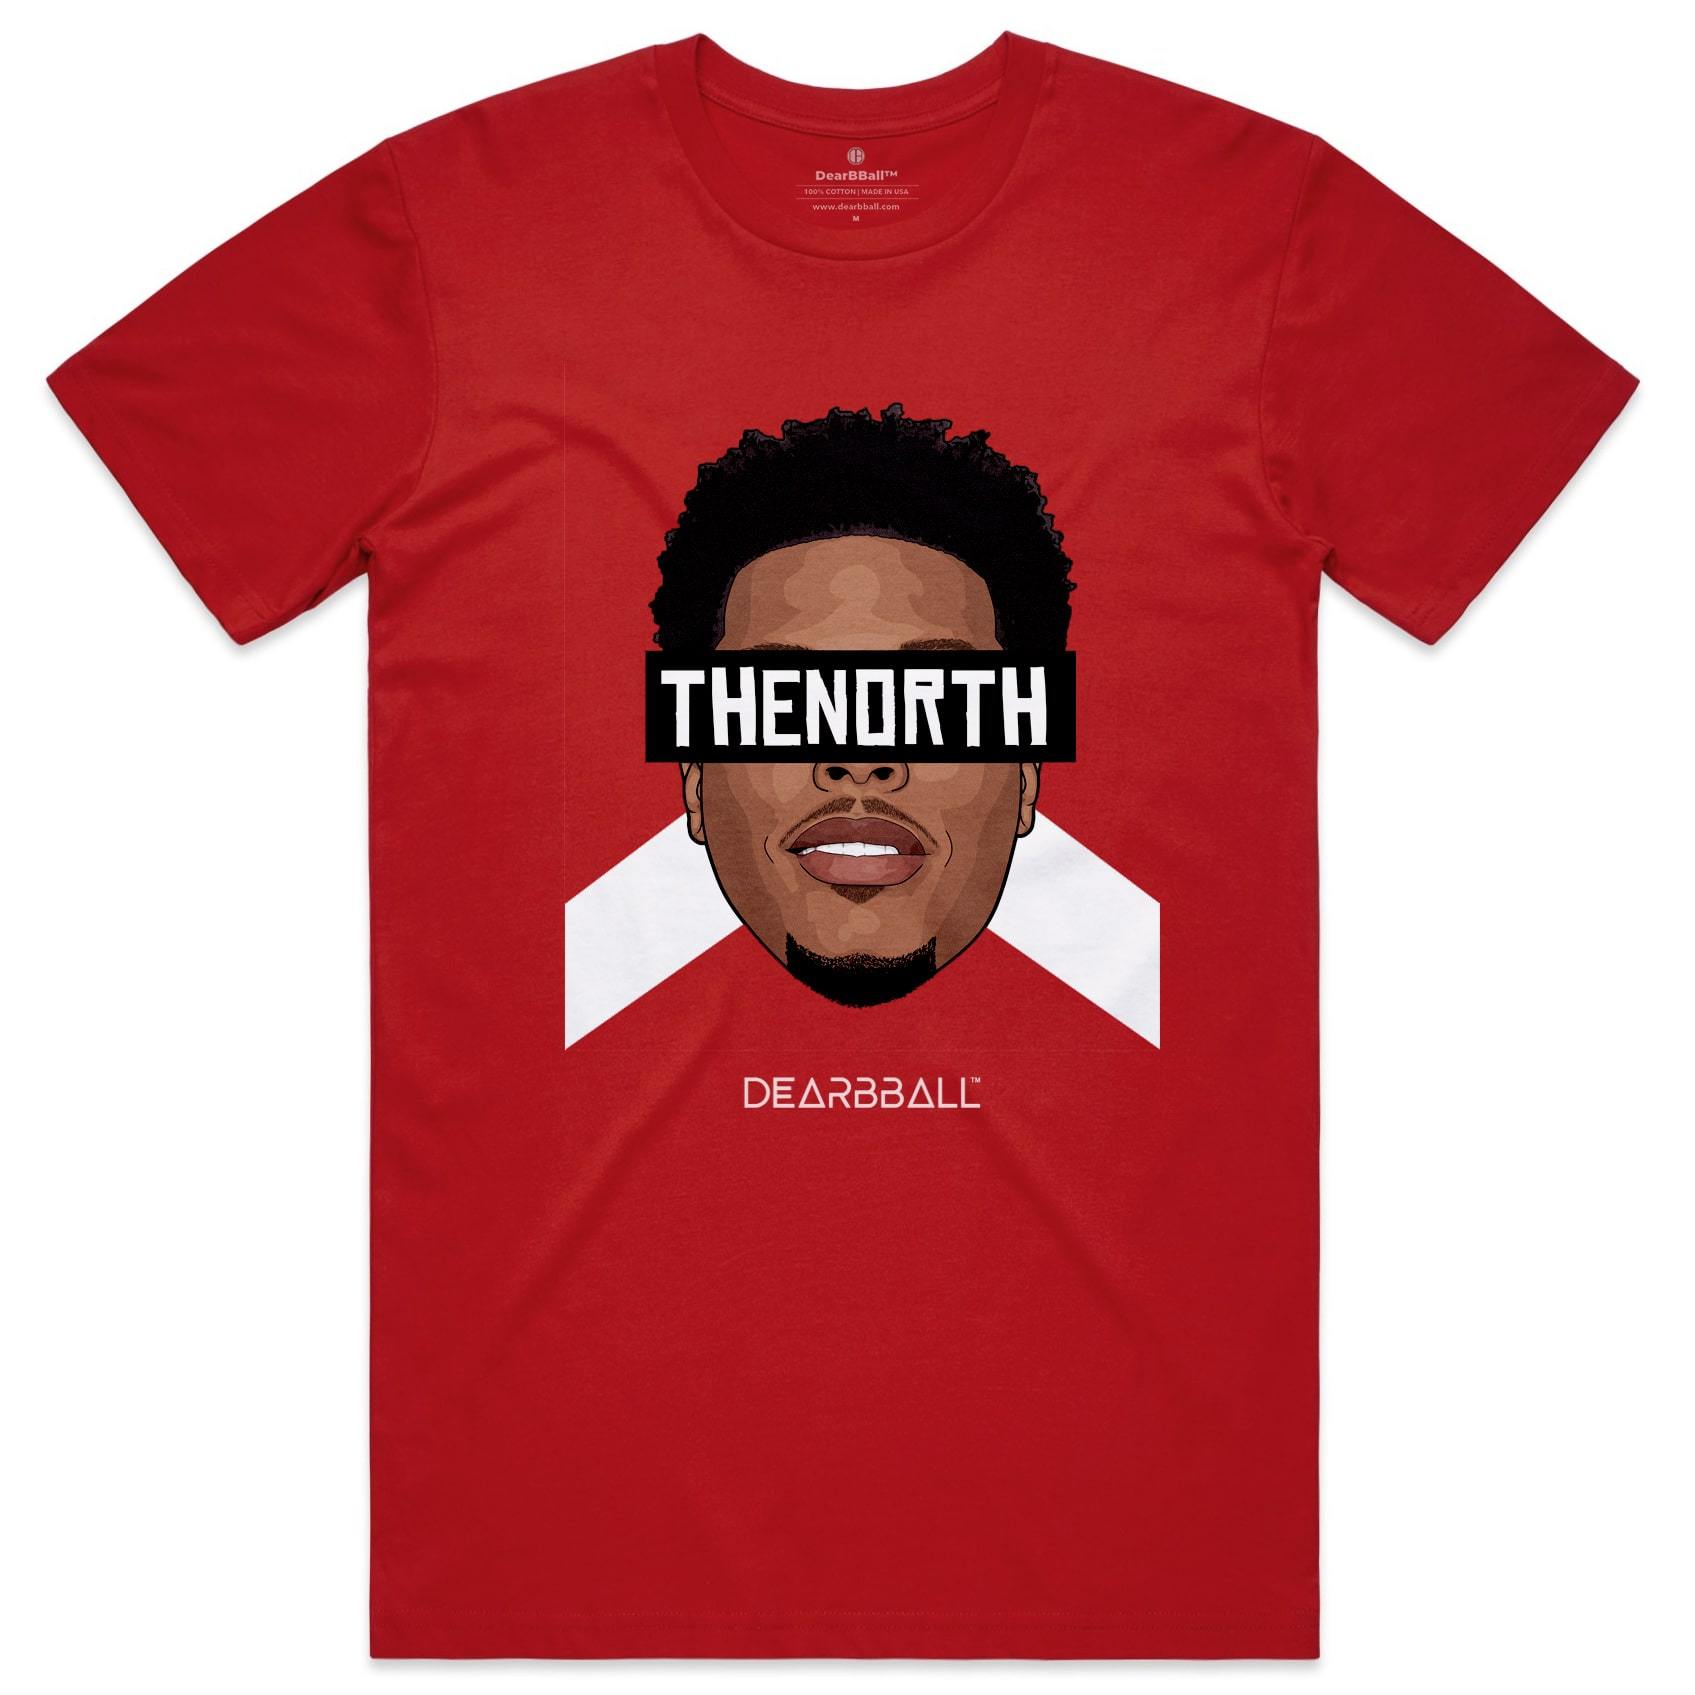 Kyle_Lowry_Shirt_The_North_Earned_Dearbball_Red